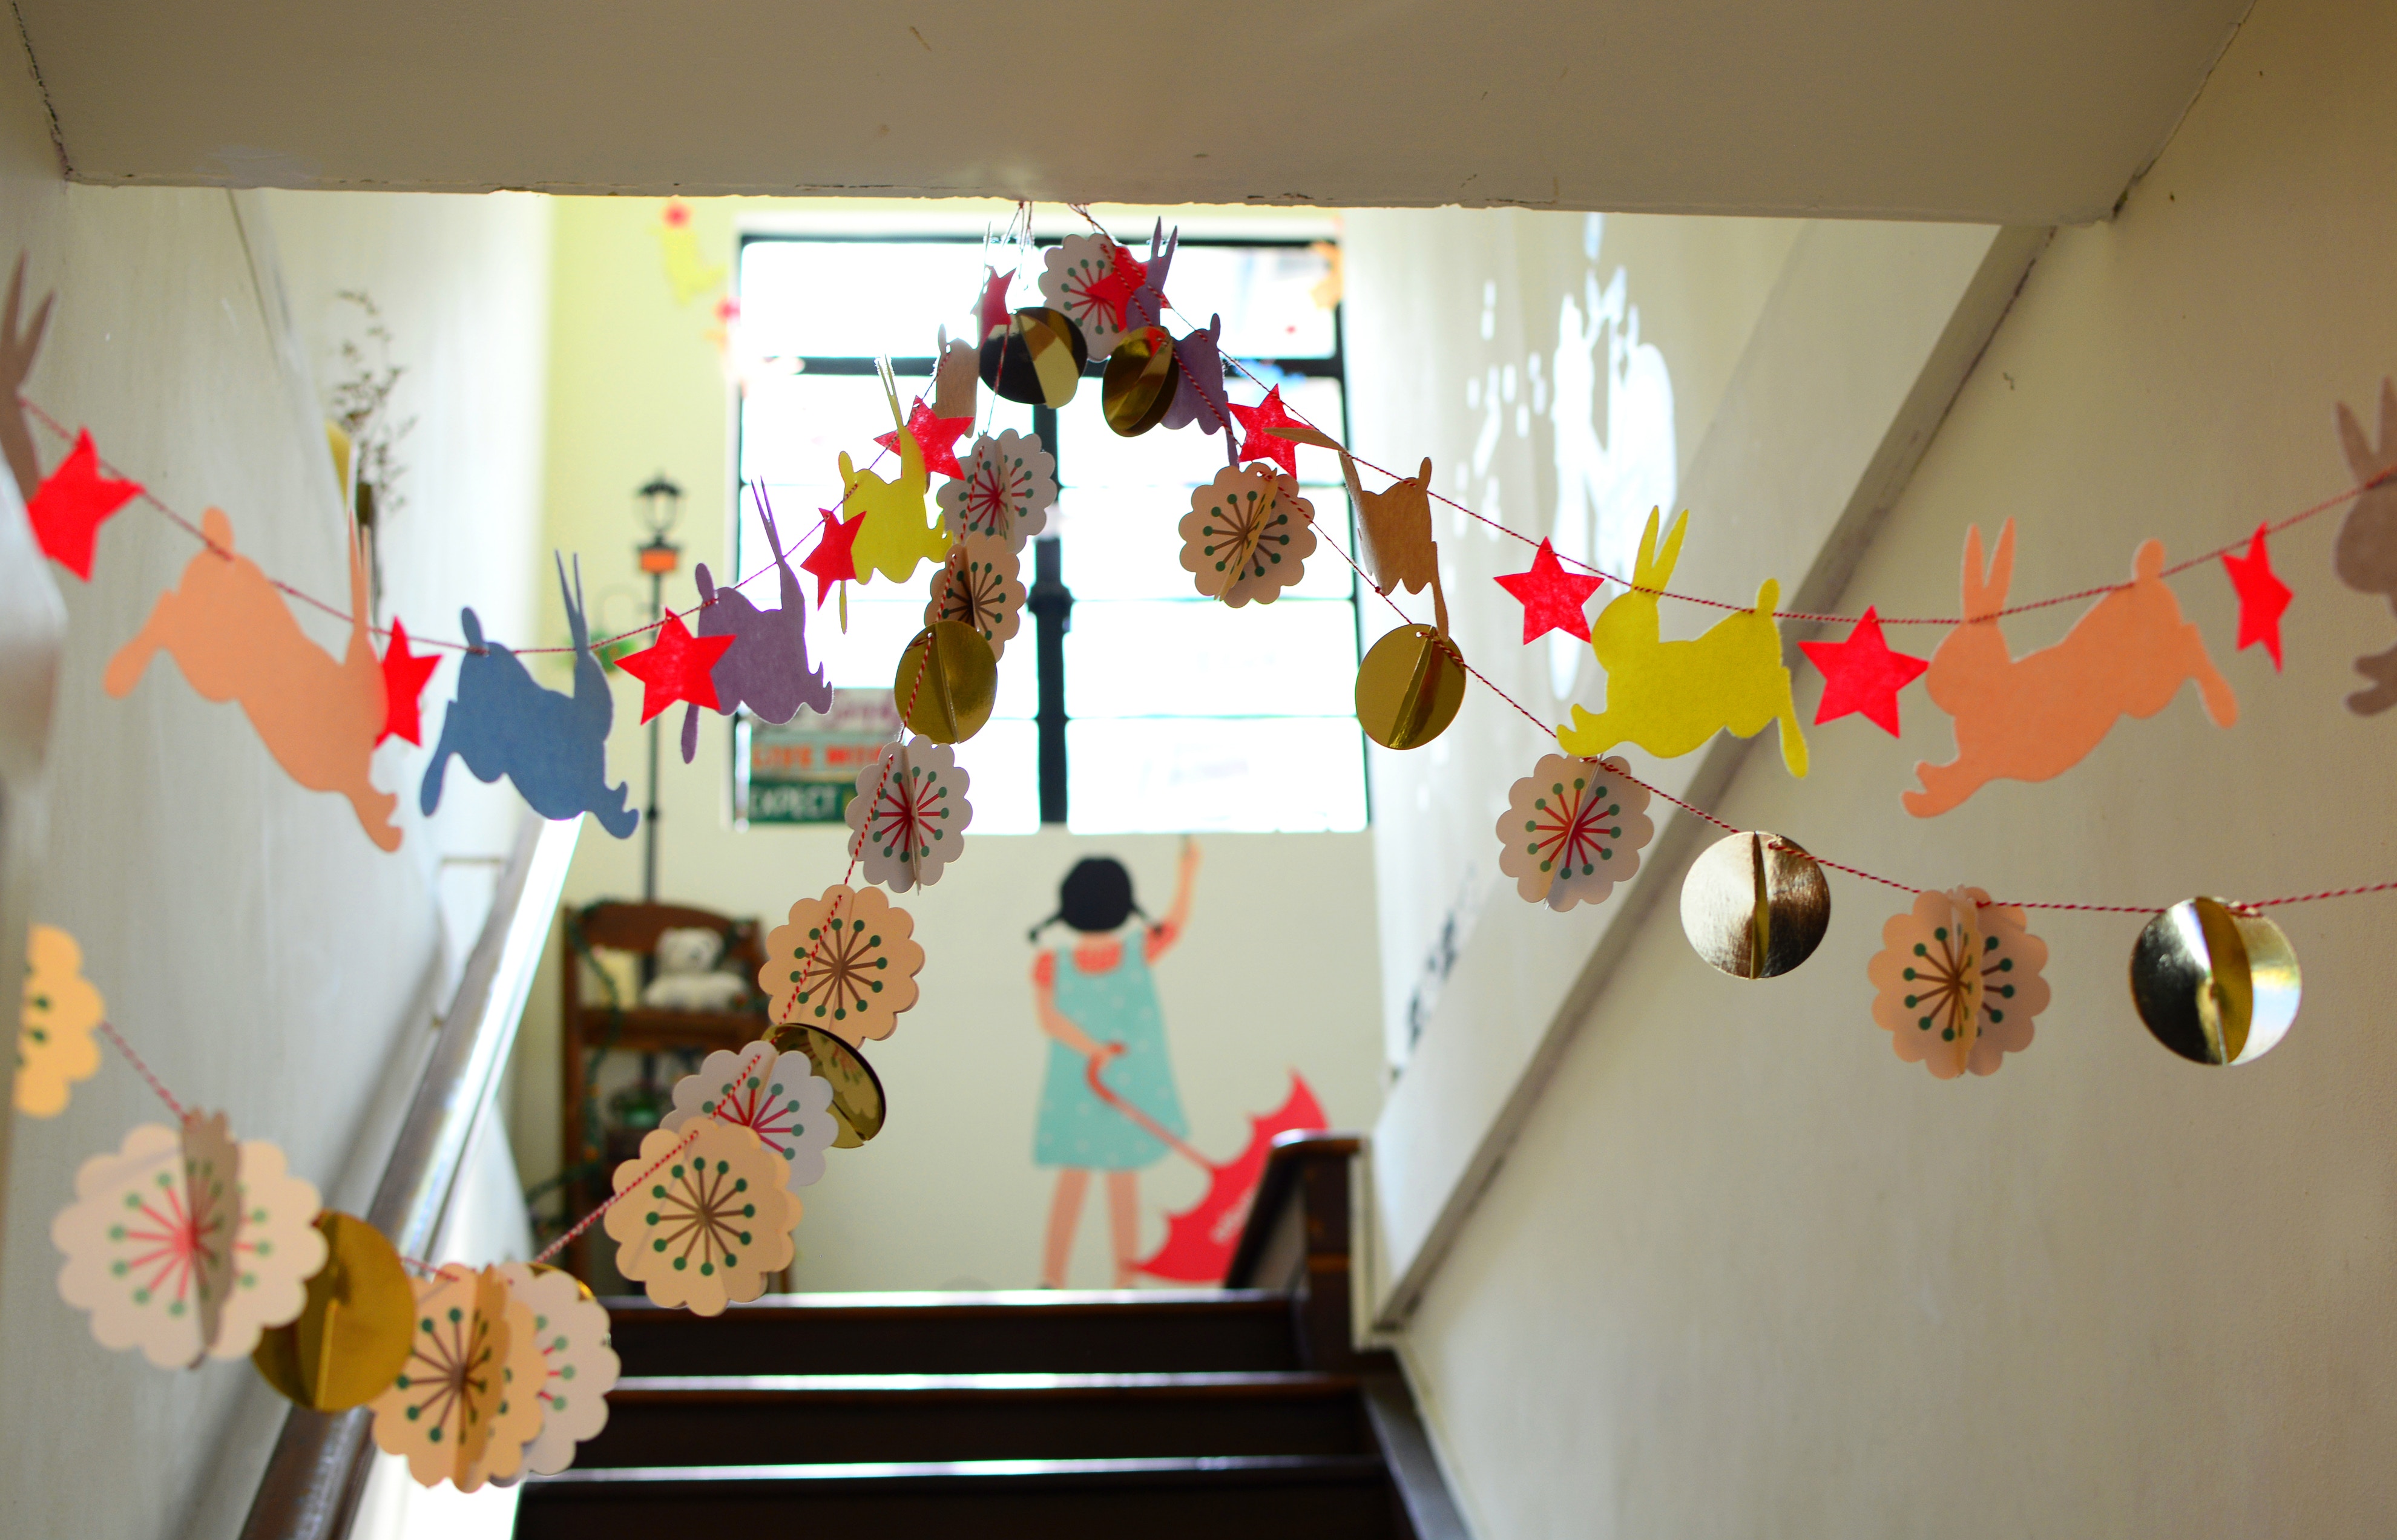 girl standing at the top of the stairs in an elementary school hallway with decorative banners in the foreground